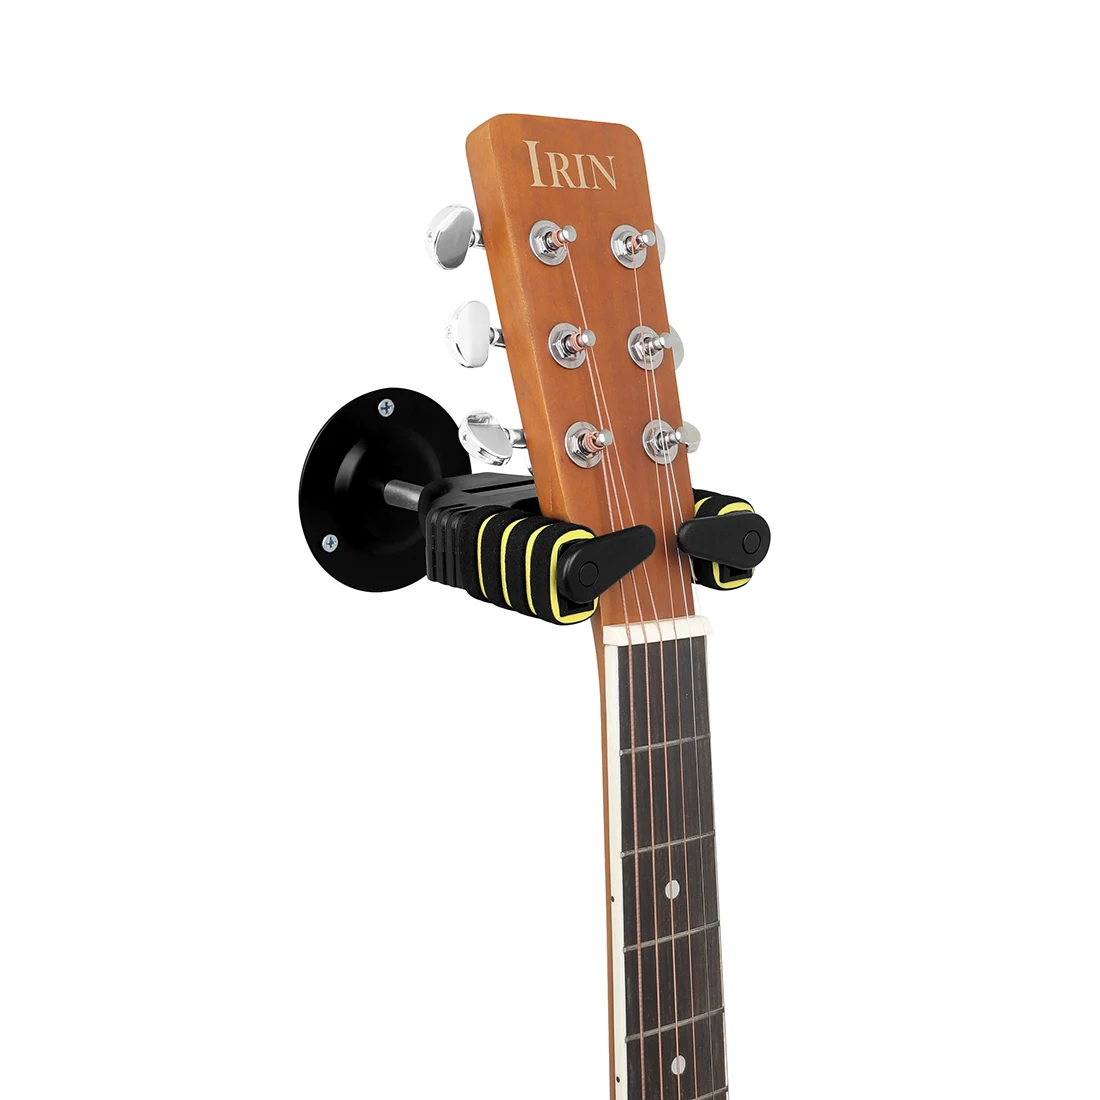 Guitar Stand Wall Mount Round Base Gravity Self-Locking Wall Stand Bracket Guitar Violin Bass Ukulele Guitar Parts Accessories